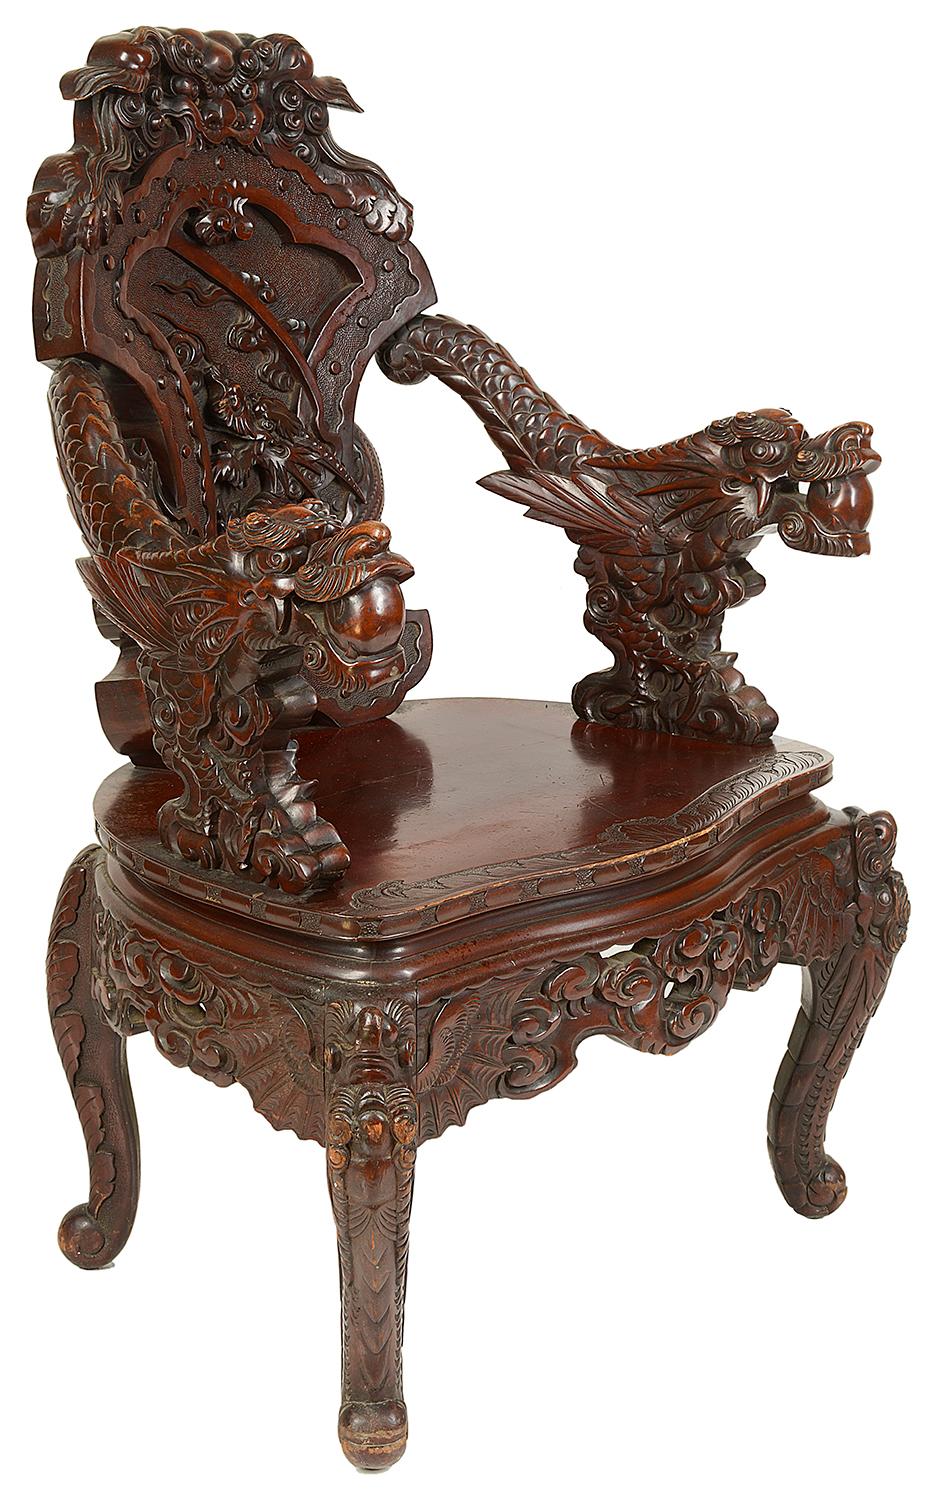 A very dramatic 19th century Japanese carved armchair. Depicting mythical dragons to the arms and back, amongst clouds. Raised on carved cabriole legs.